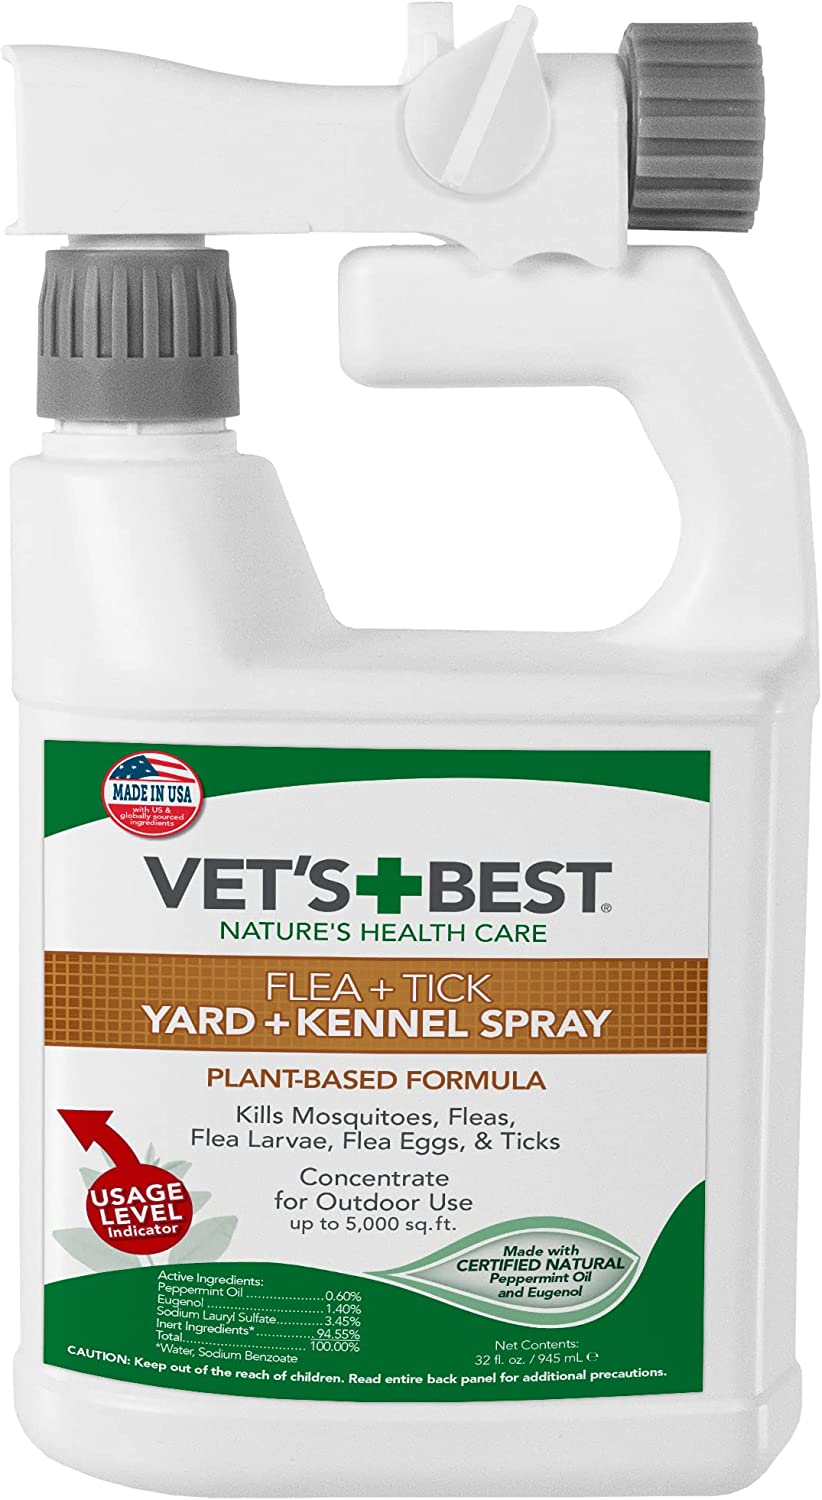 natural tick spray for yard review